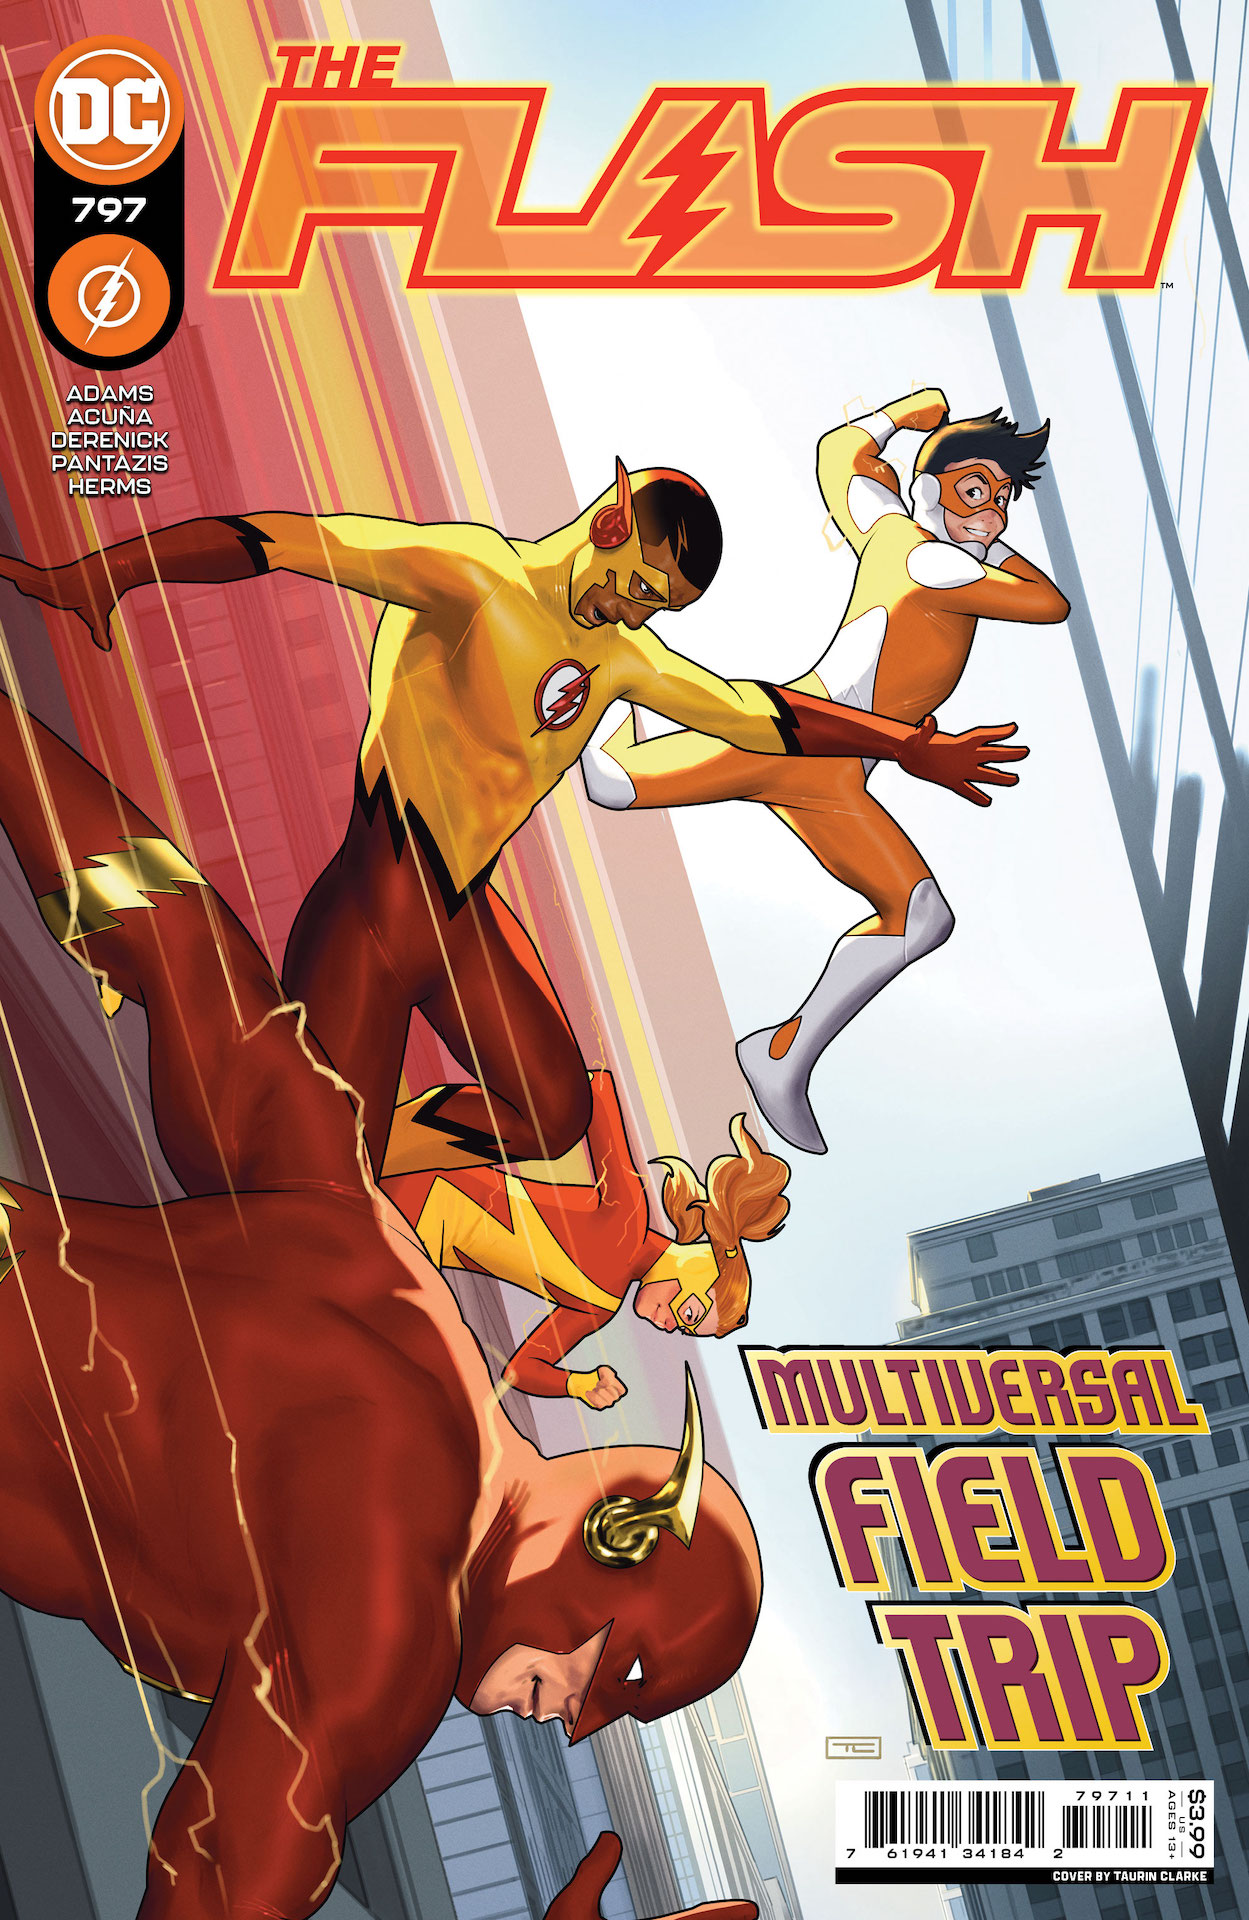 DC Preview: The Flash #797